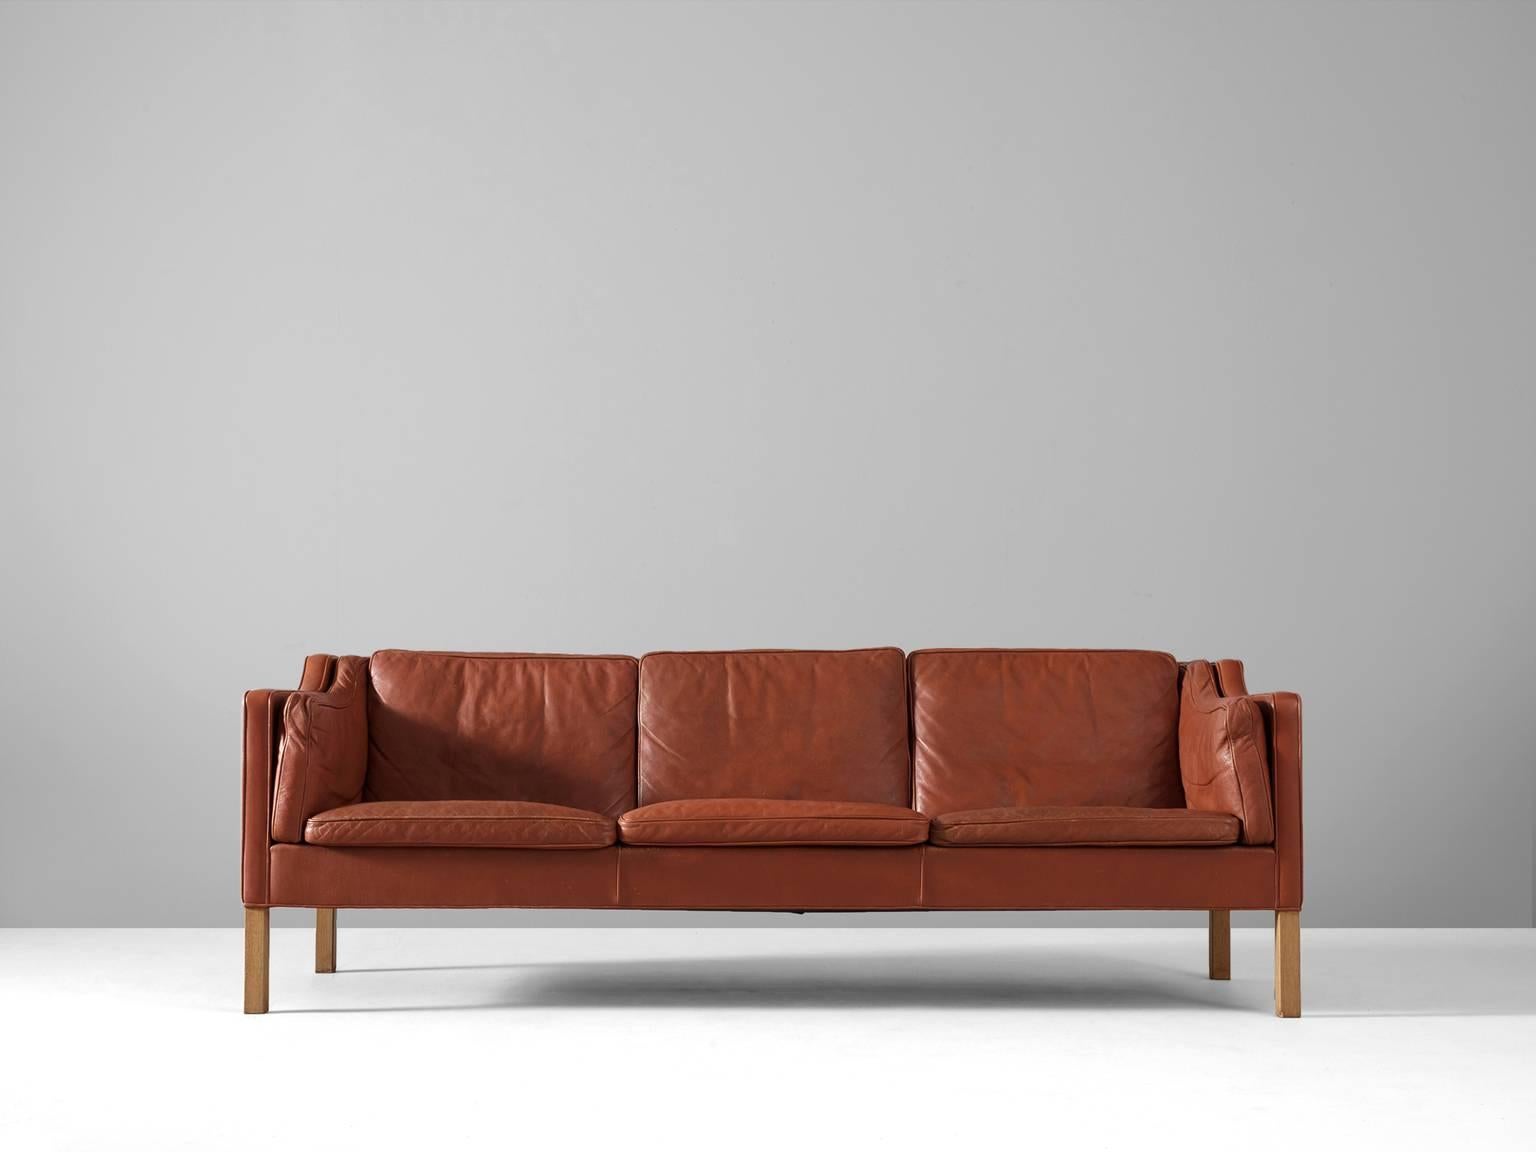 Three-seat sofa BM2213, leather and oak, by Børge Mogensen for Fredericia Stolefabrik, Denmark 1962. 

Very well conditioned three-seat sofa from Børge Mogensen. This model was designed by Mogensen for his own home, in his goal to create the